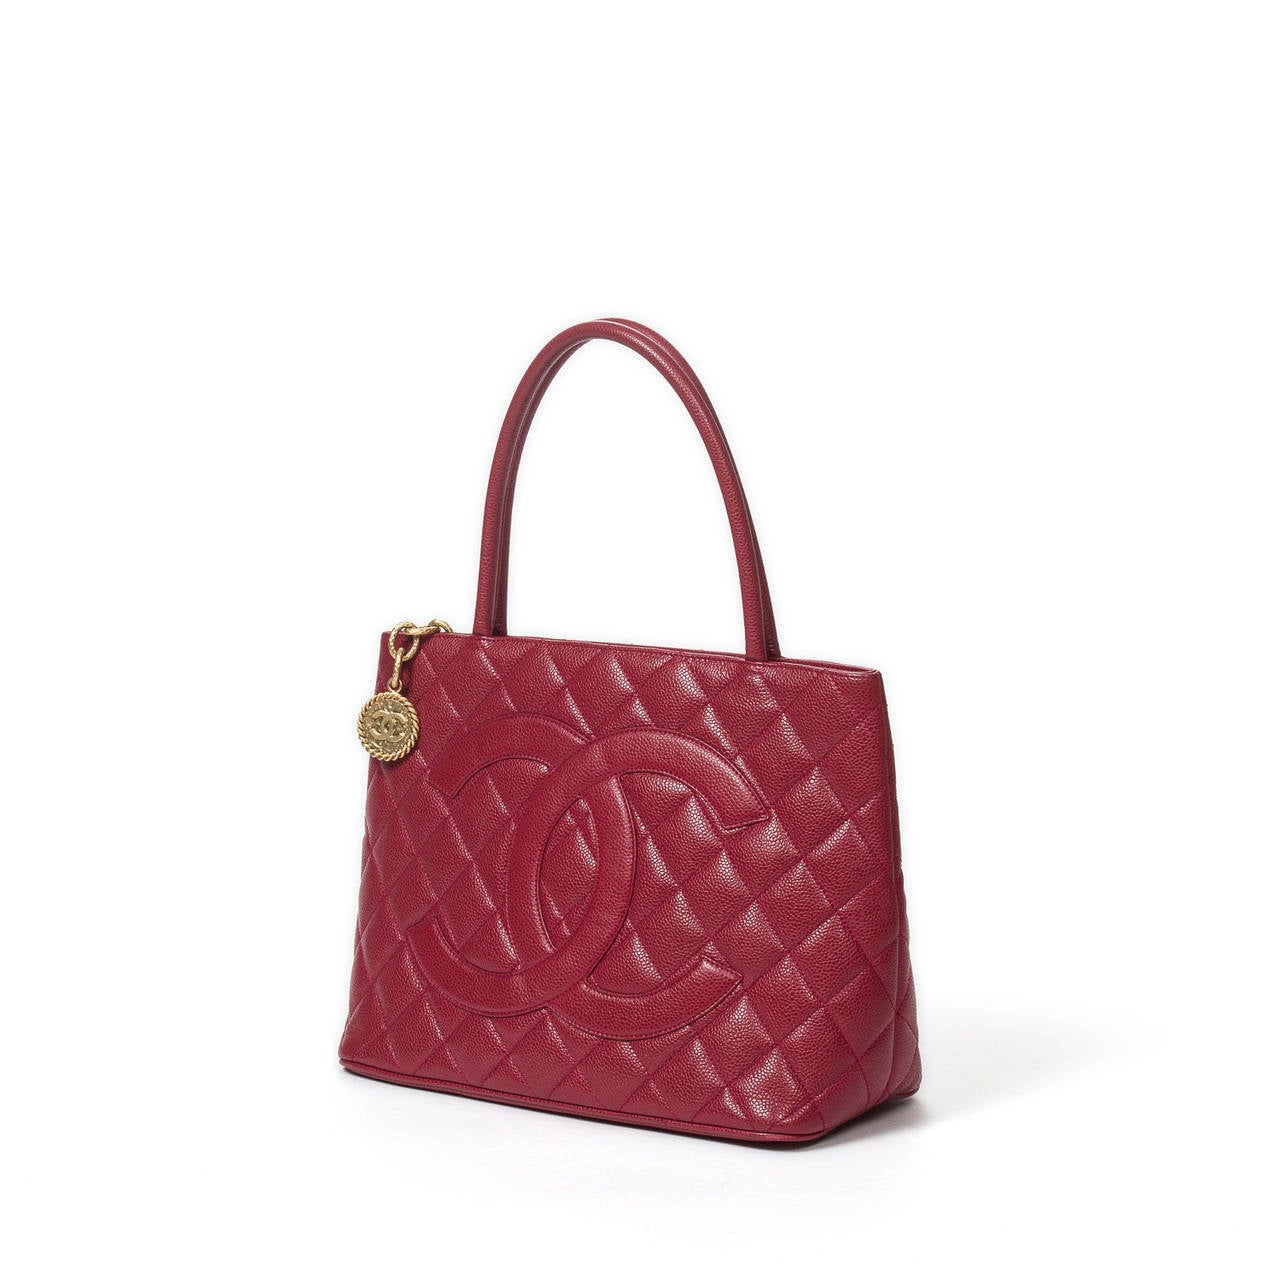 Médaillon in red raspberry quilted caviar leather with brushed gold tone hardware. Red raspberry leather lining with one zip pocket and one slip pocket. Model from 2000-2002 (Code : 6386264). Box, dustbag, authenticity card and stitcker included.